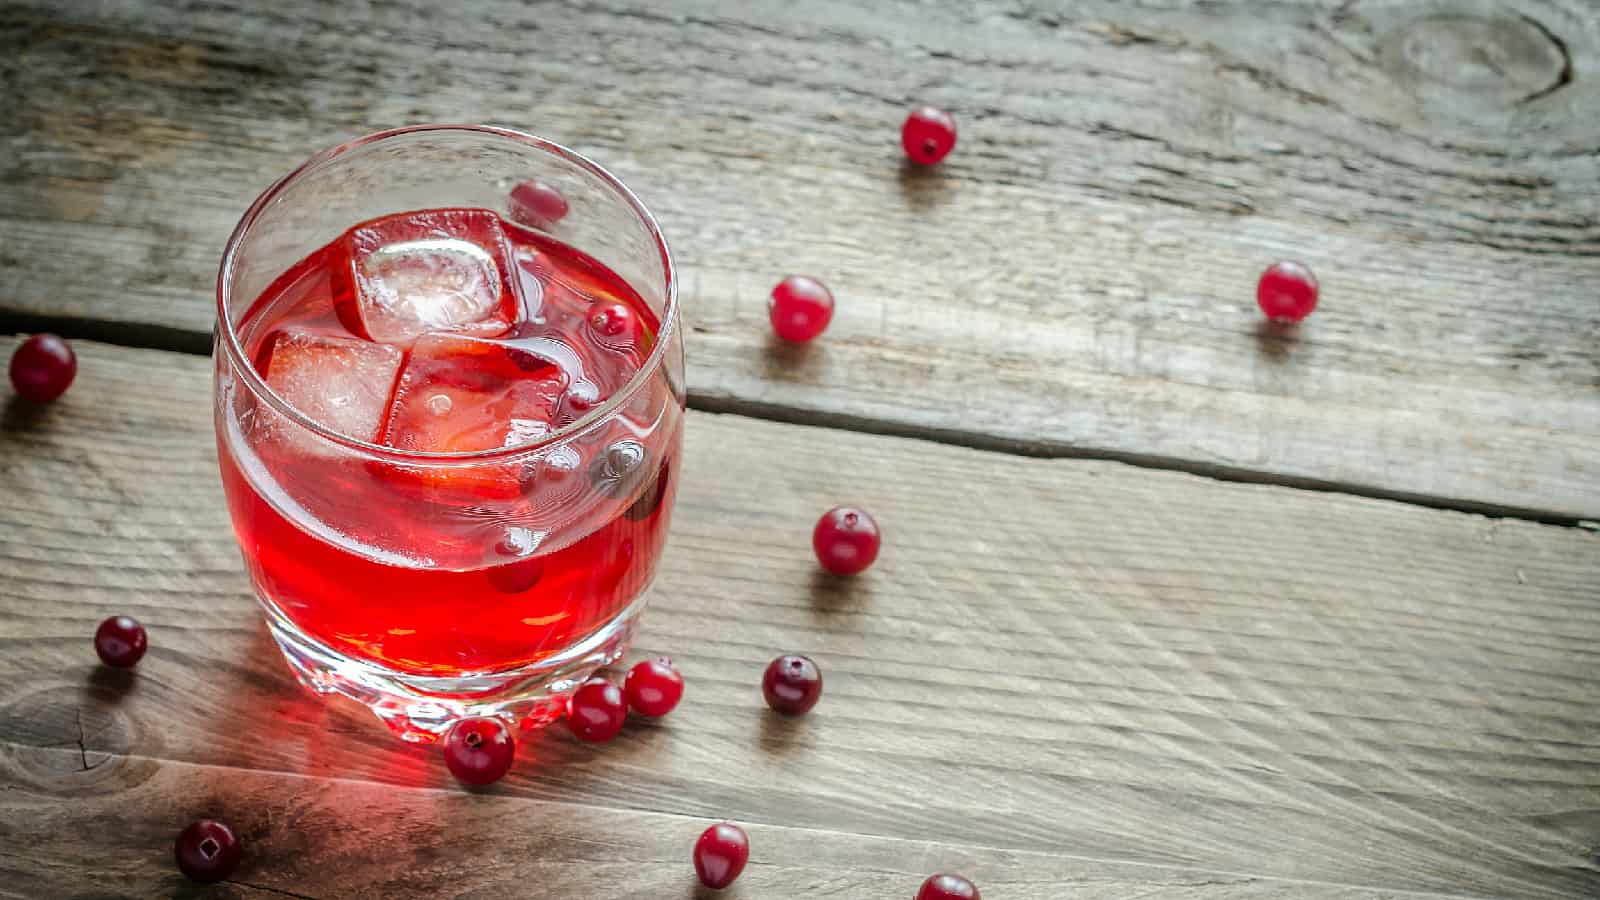 Cranberry Juice Detox and Passing a Drug Test